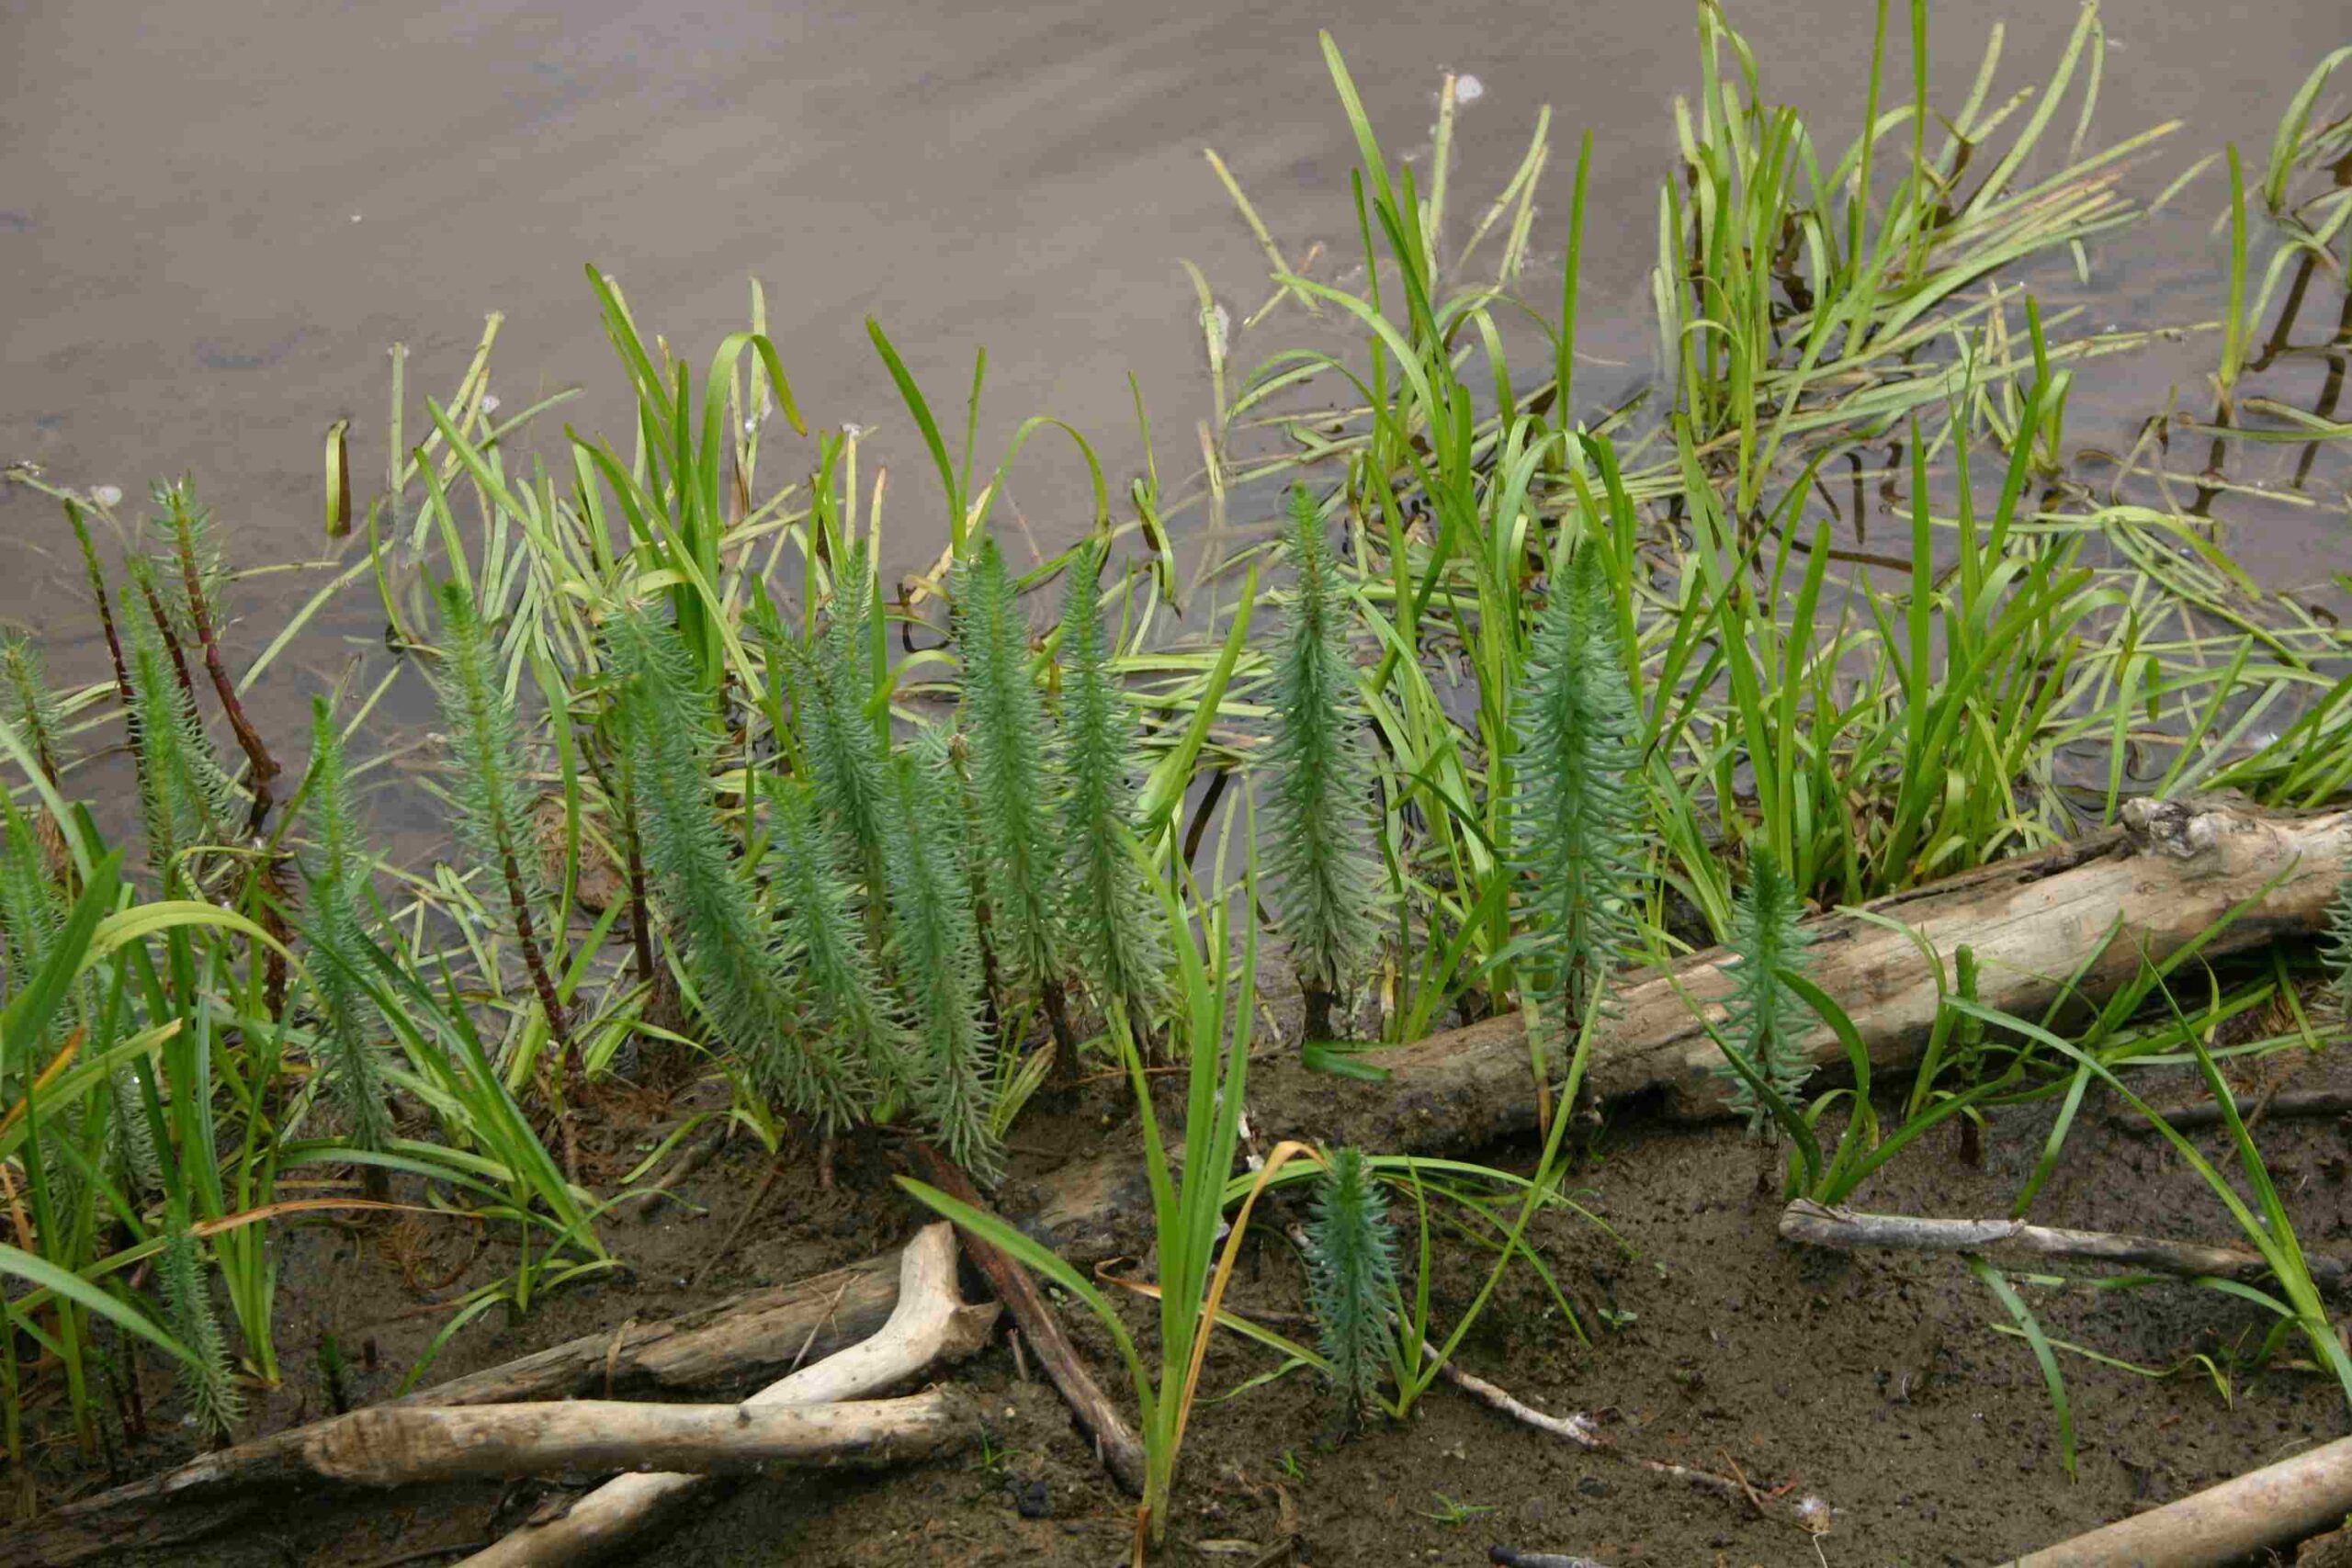 Short, feathery plants growing in the mud along a bank of water.